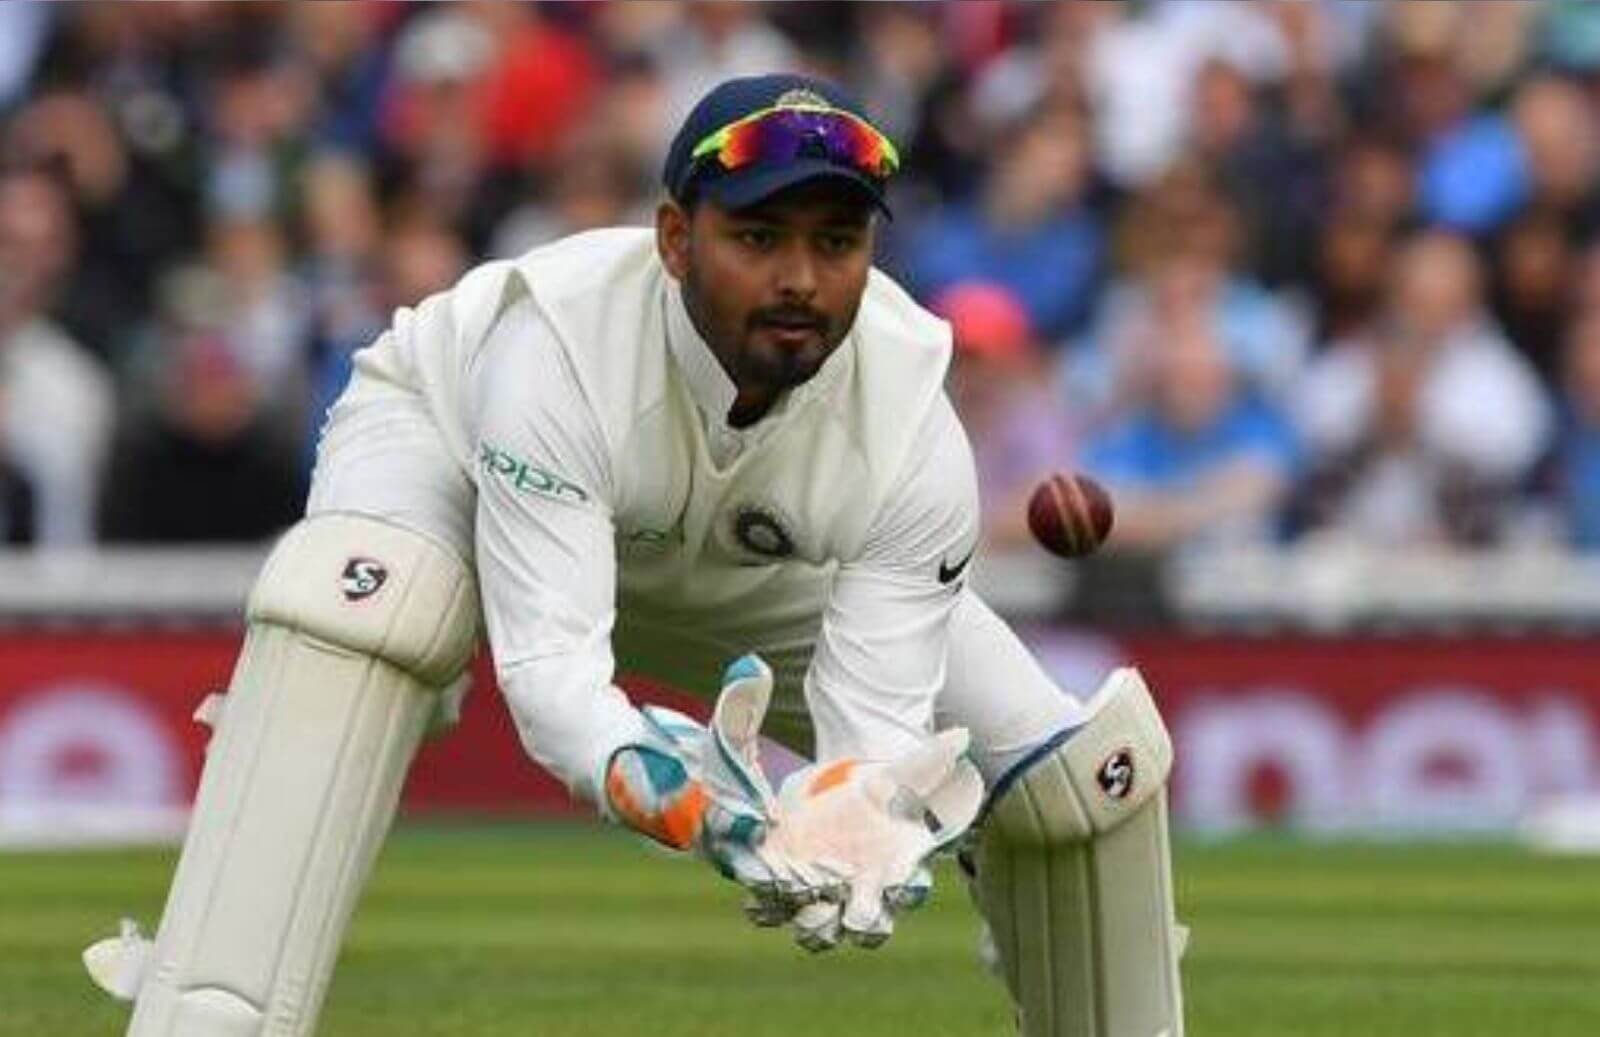 He Has Dropped More Catches Than Any Other Keeper In The World,’ Ricky Ponting Mocks Rishabh Pant Sloppy Wicketkeeping